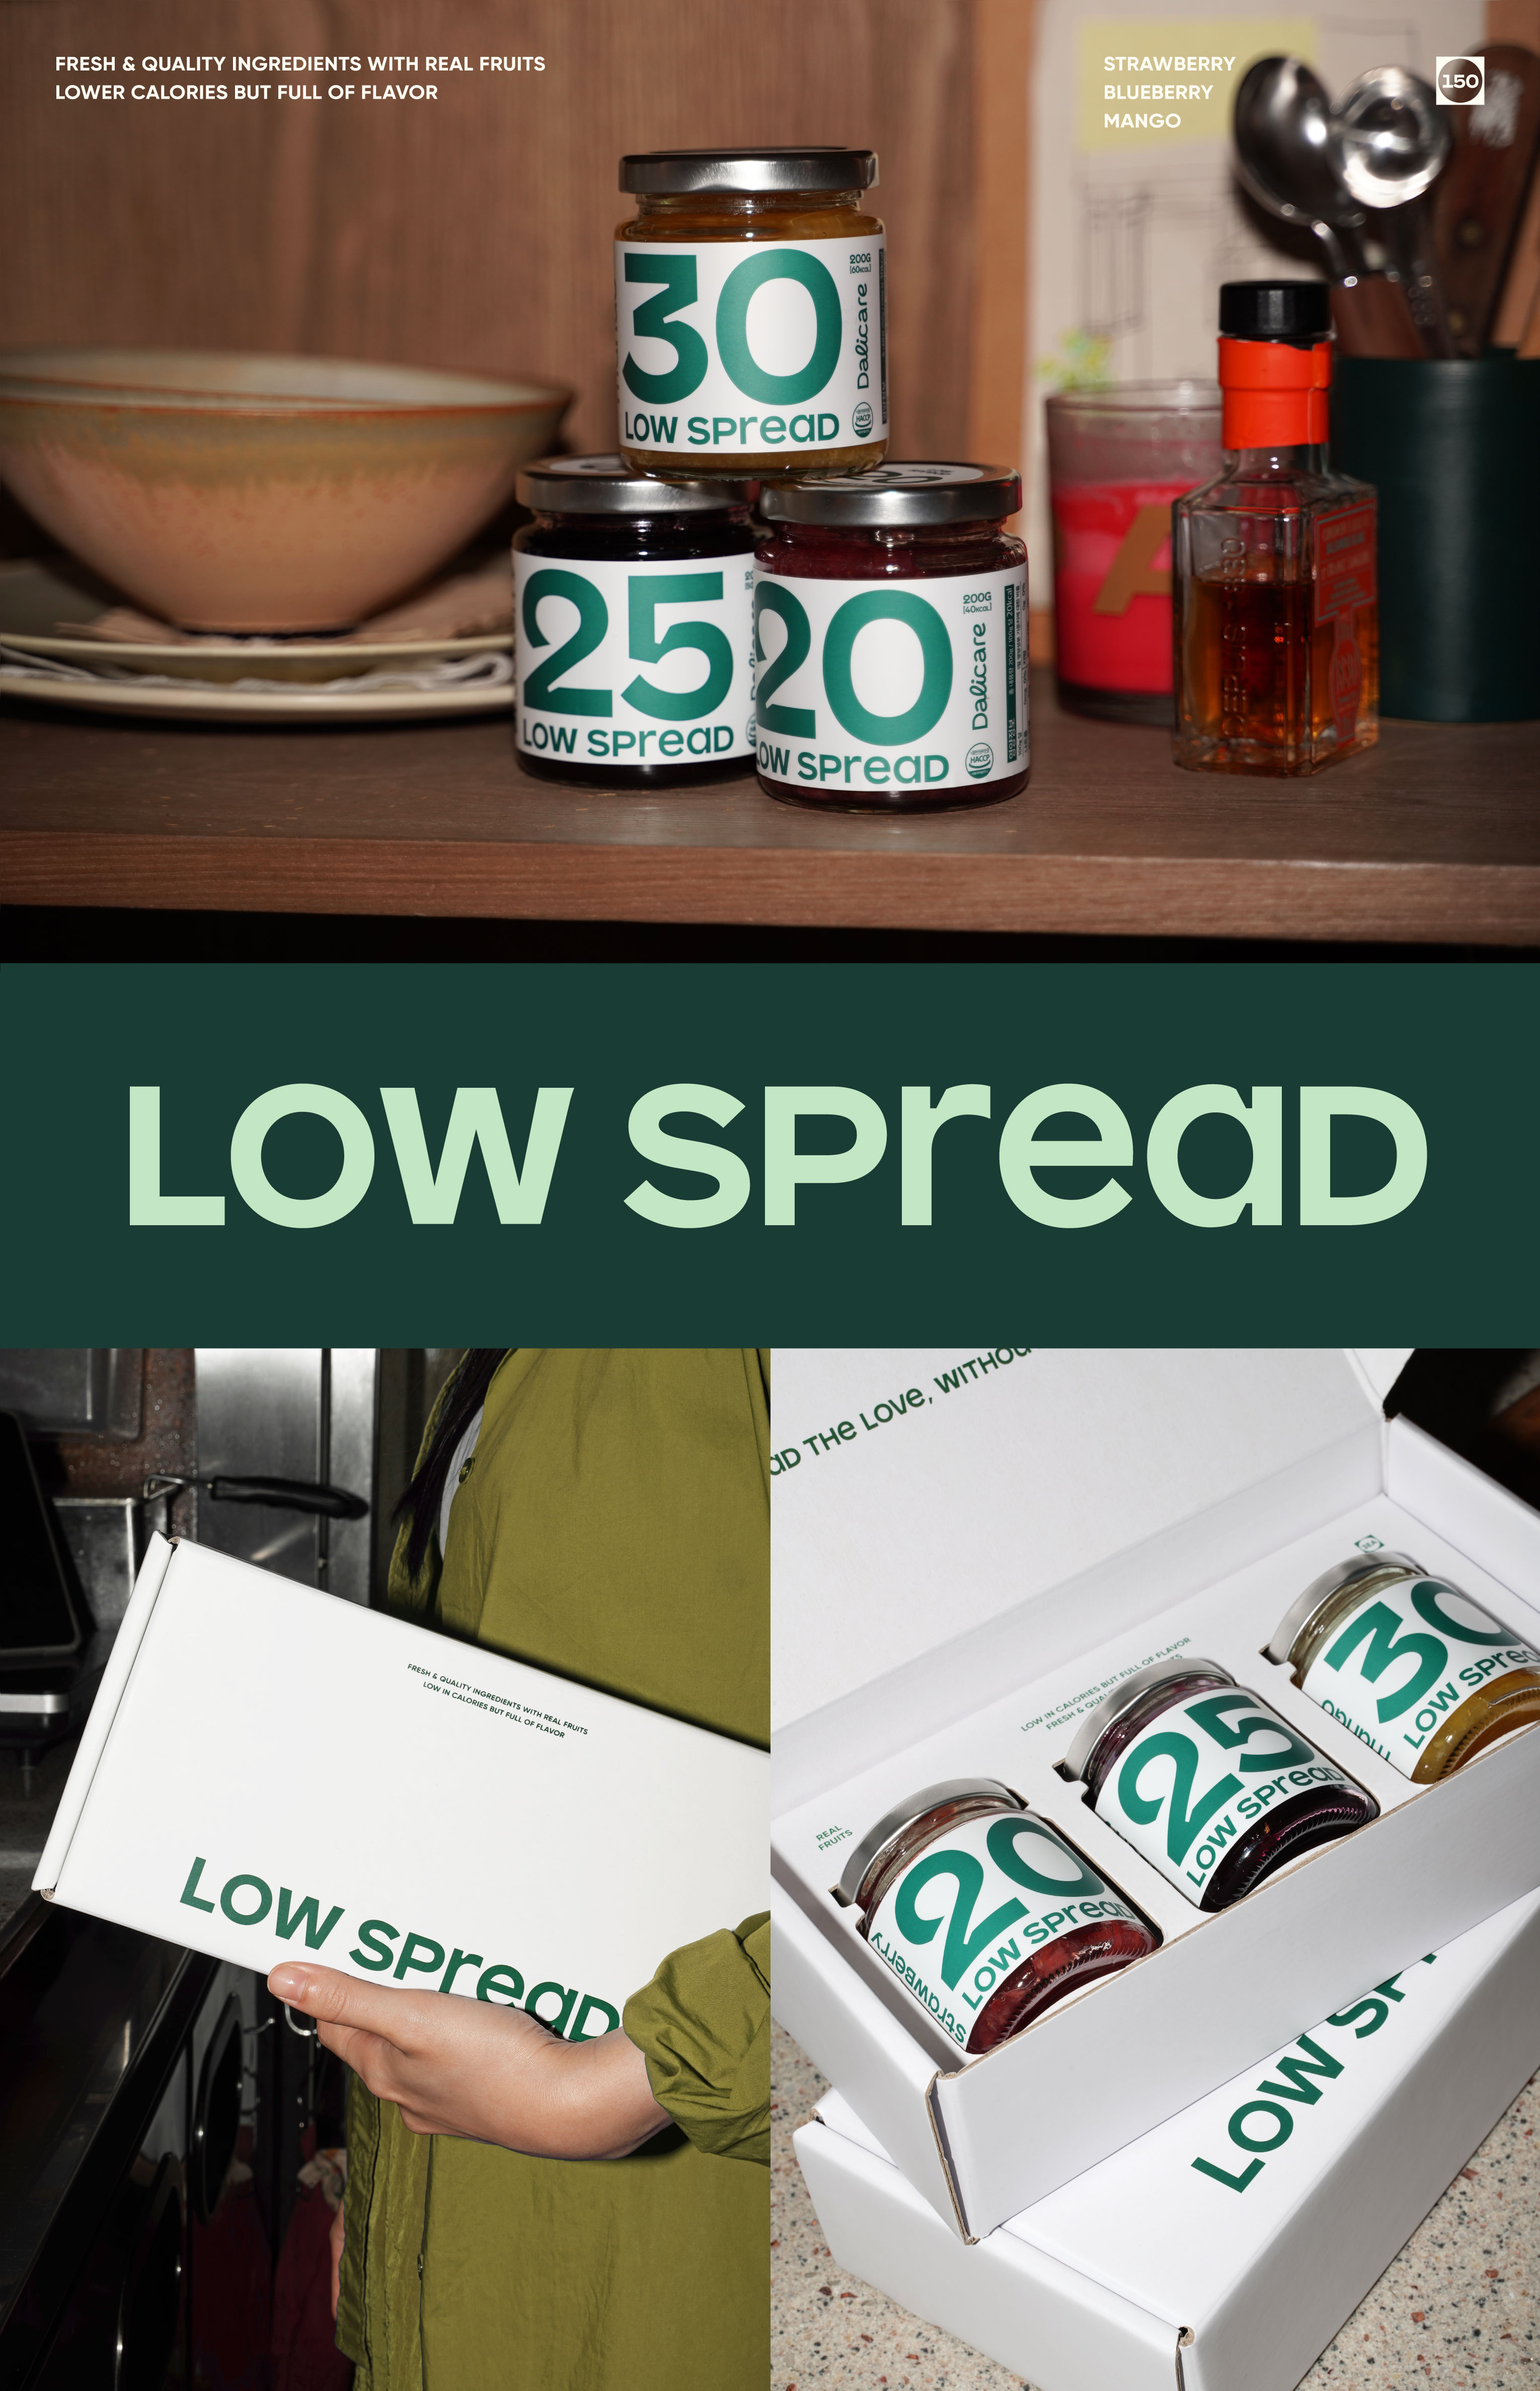 Low Spread’s Transparent Packaging Is Geared To The Health Conscious Consumer